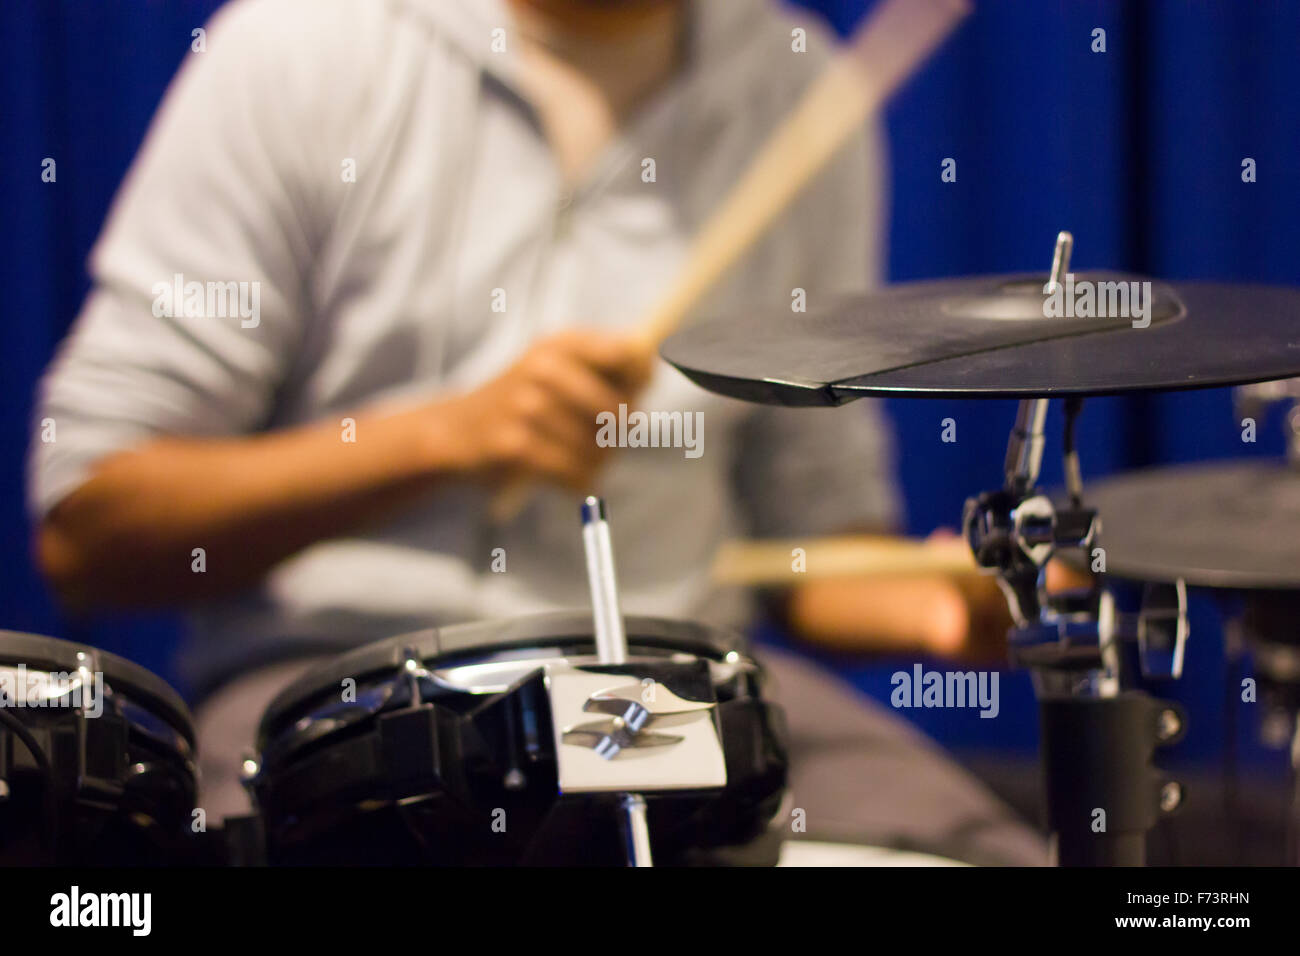 Action shot of a drummer practicing drums Stock Photo